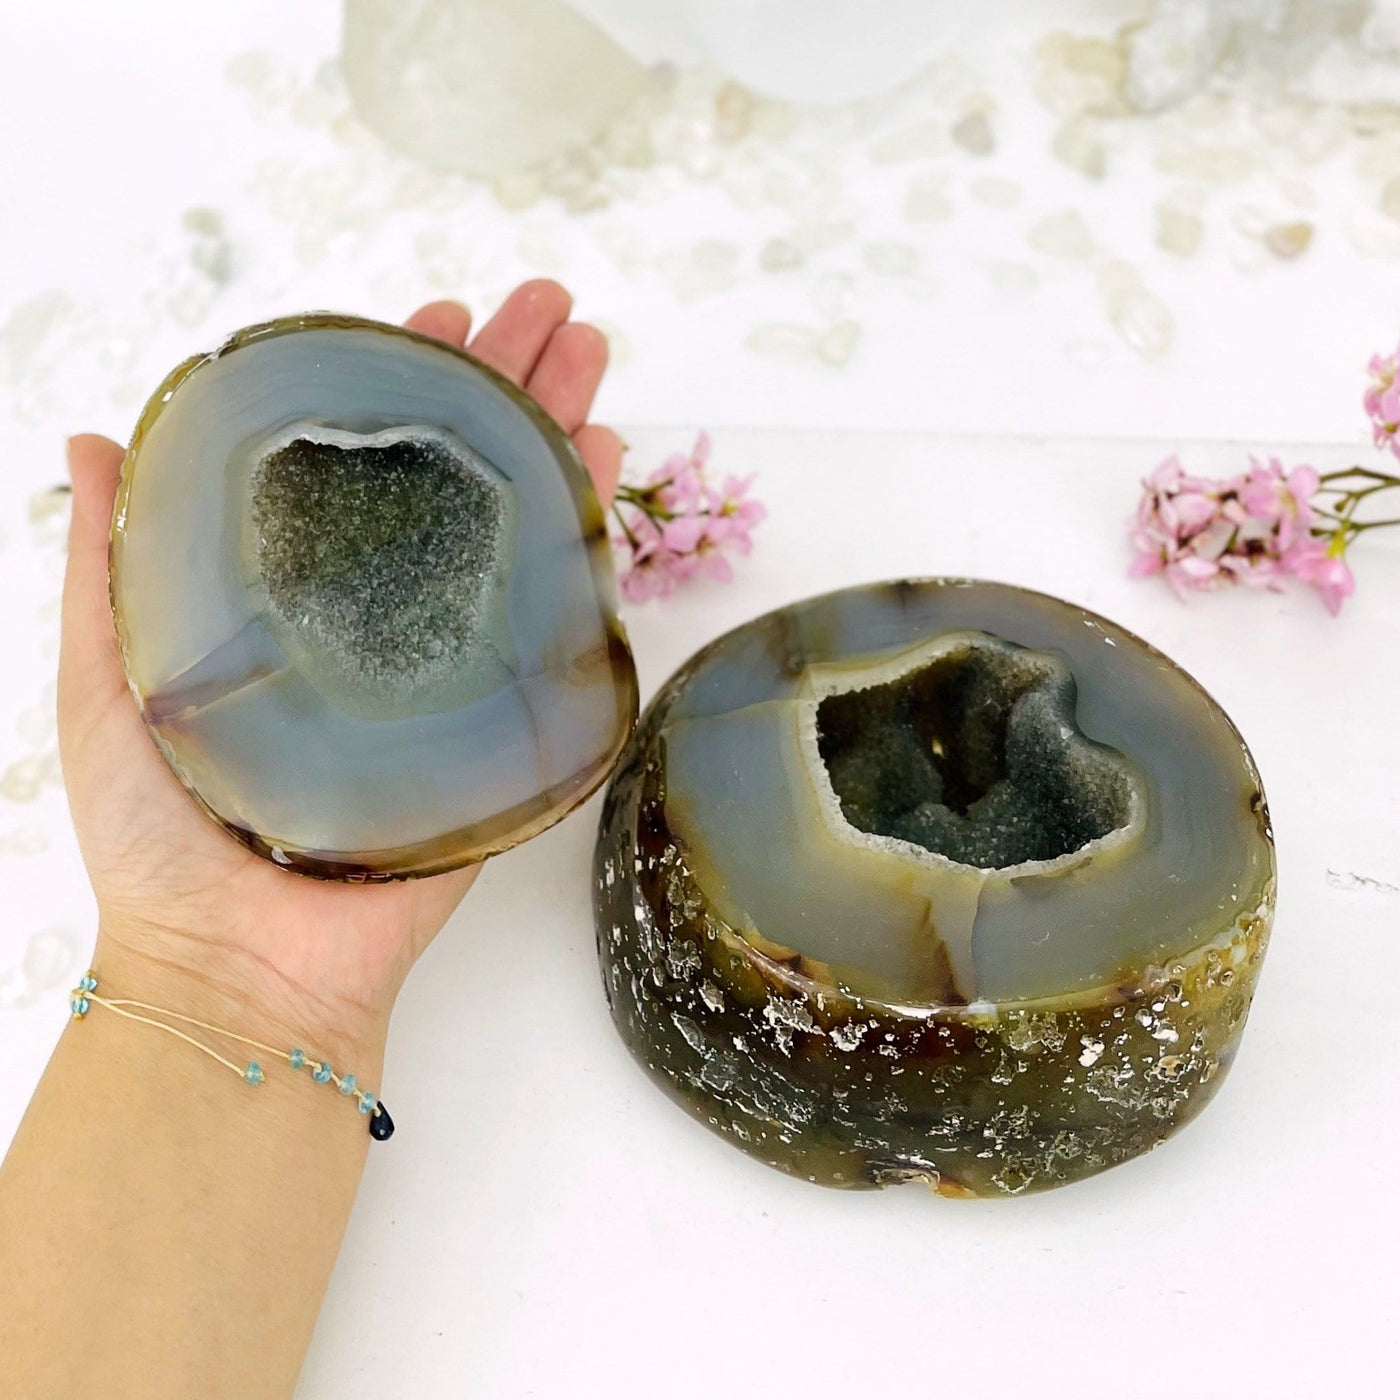 Agate geode box open displaying the pattern and druzy, one half of the geode is in a hand. Flowers in the background.